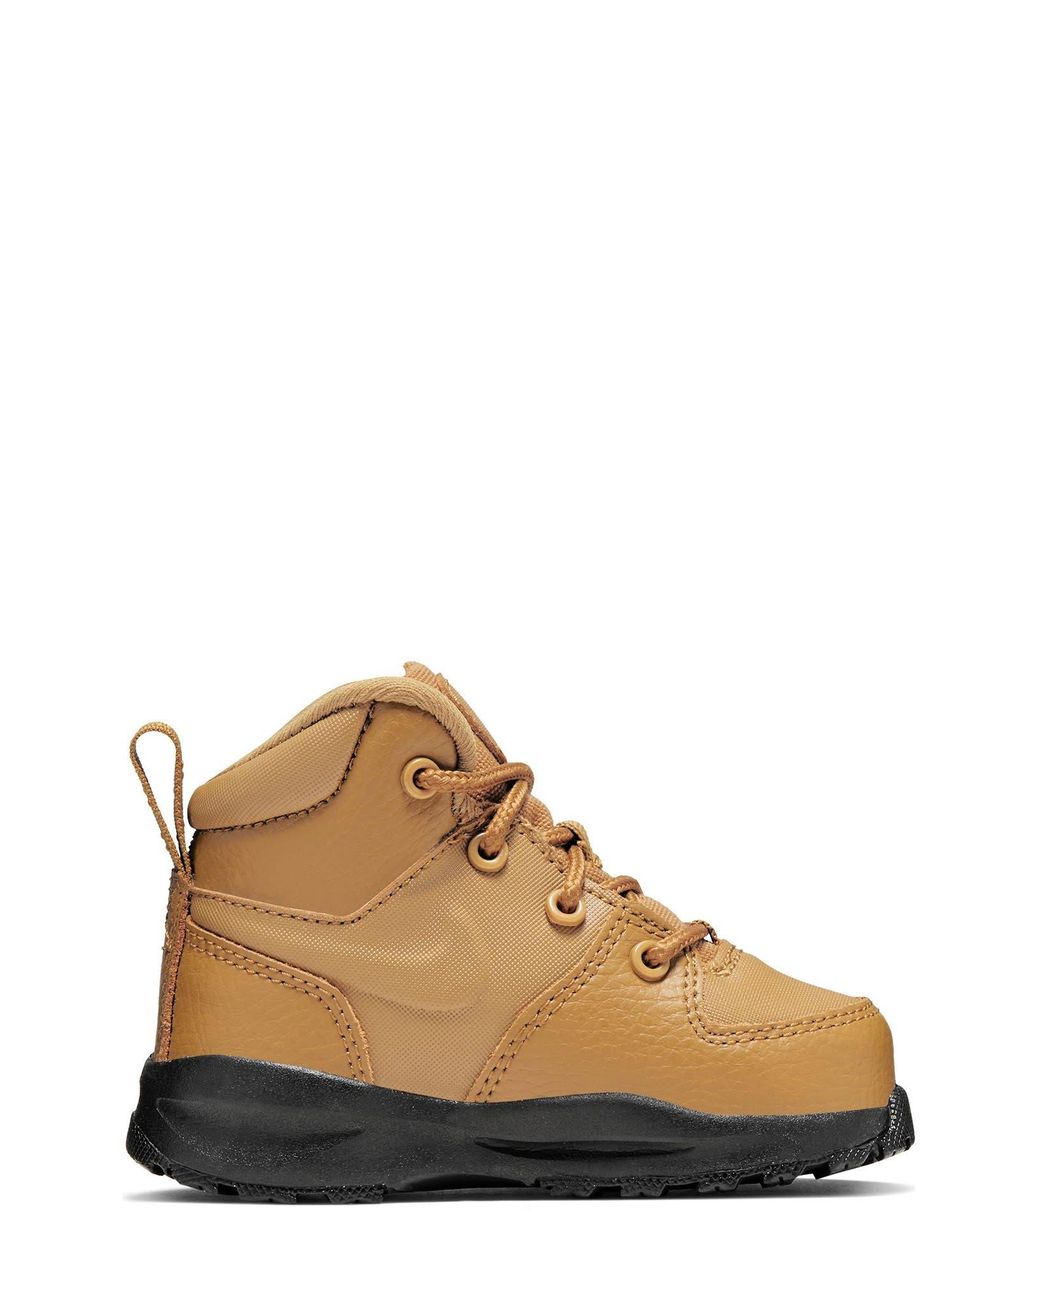 Nike Manoa Ltr (td) Boot In Wheat/wheat At Nordstrom Rack in Brown | Lyst